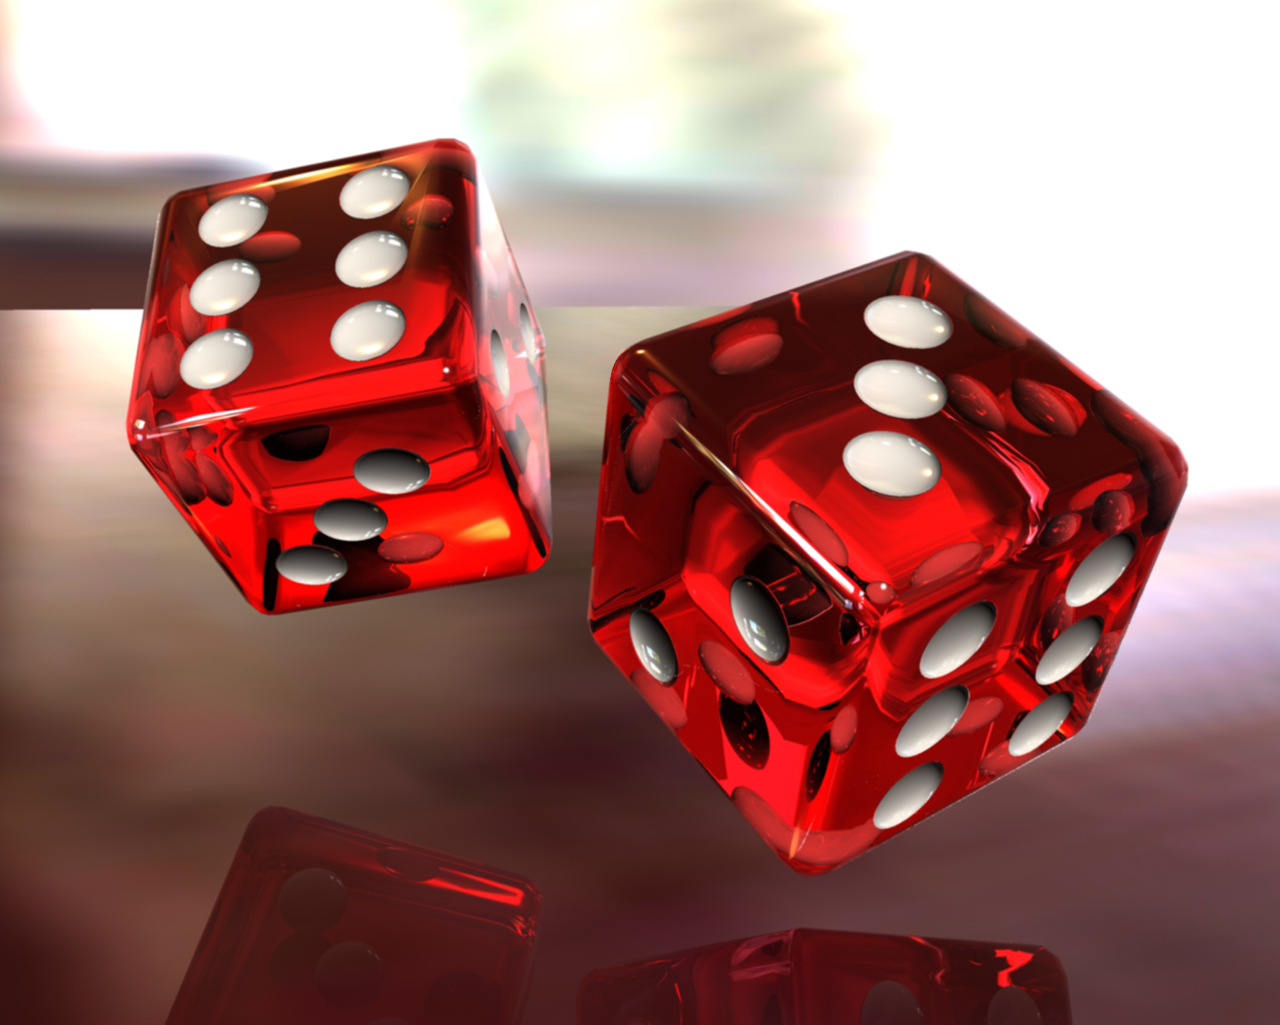 Wallpaper Neon Dice Black Dice Apples White Light Background   Download Free Image